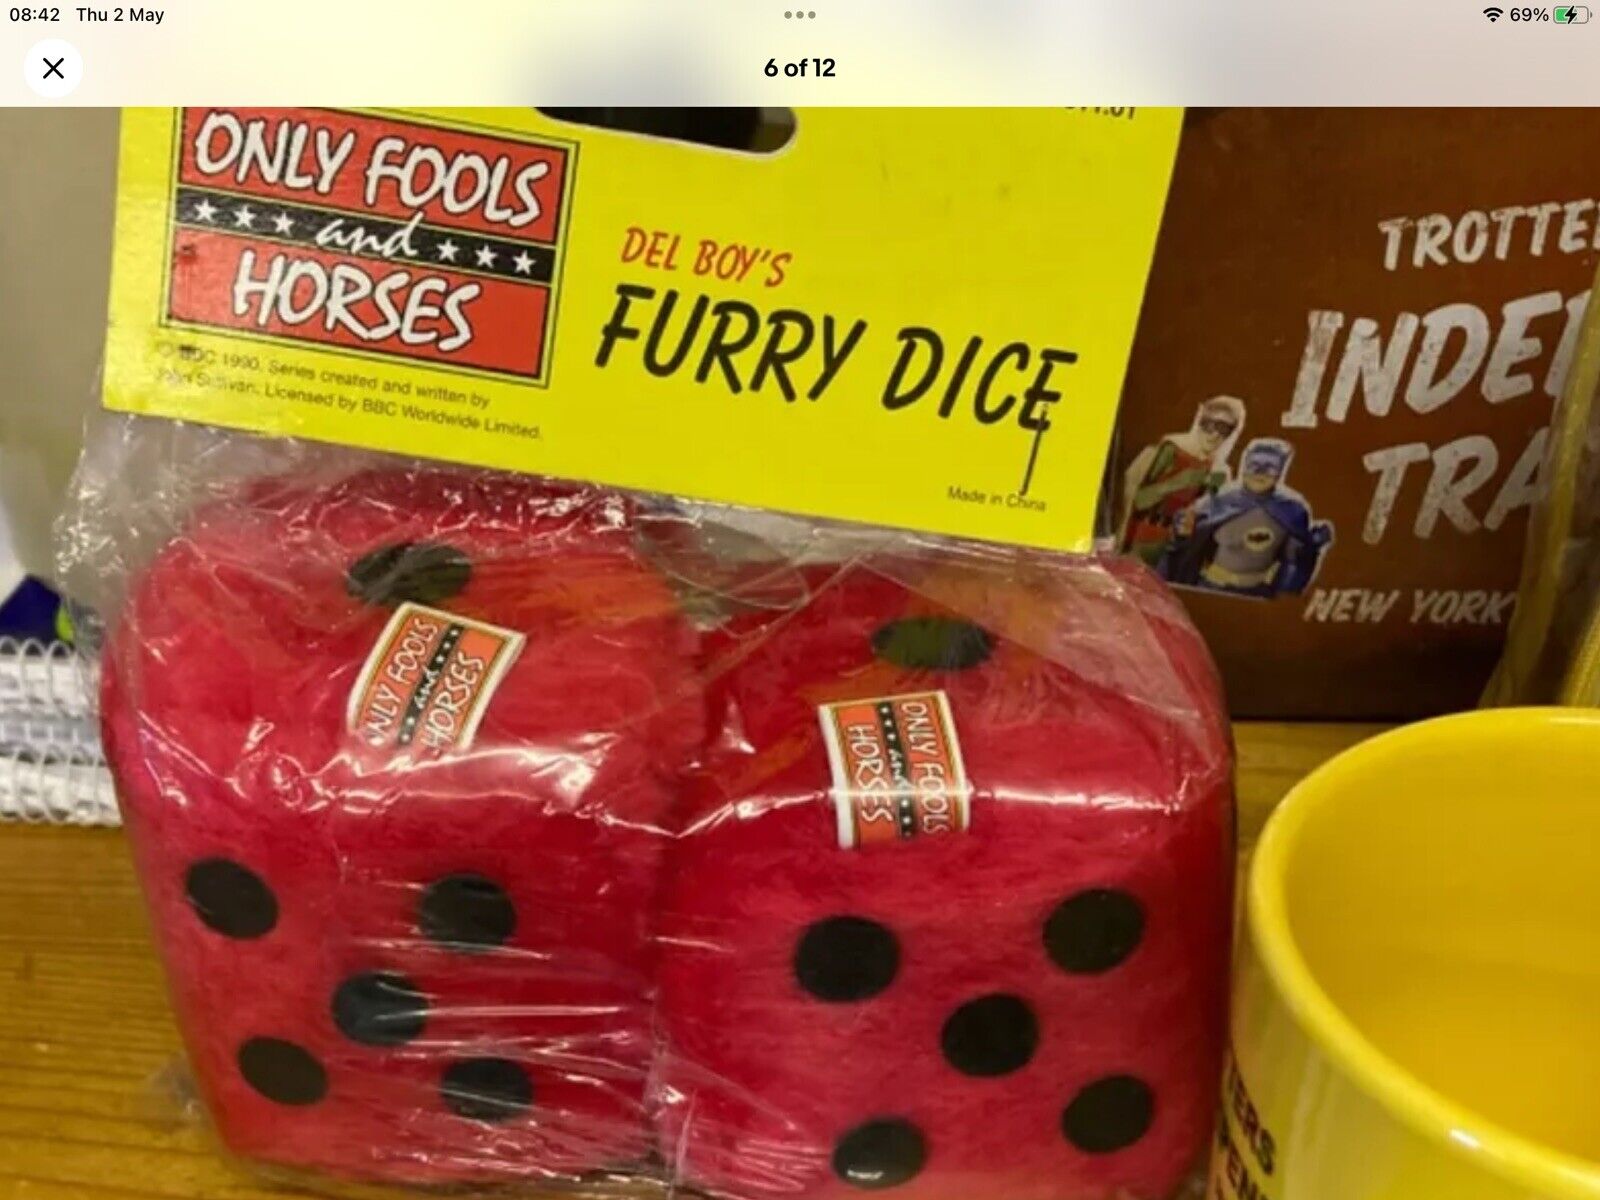 only fools and horses Rare Items,pink Fluffy Dice And Talking Bottle Opener.